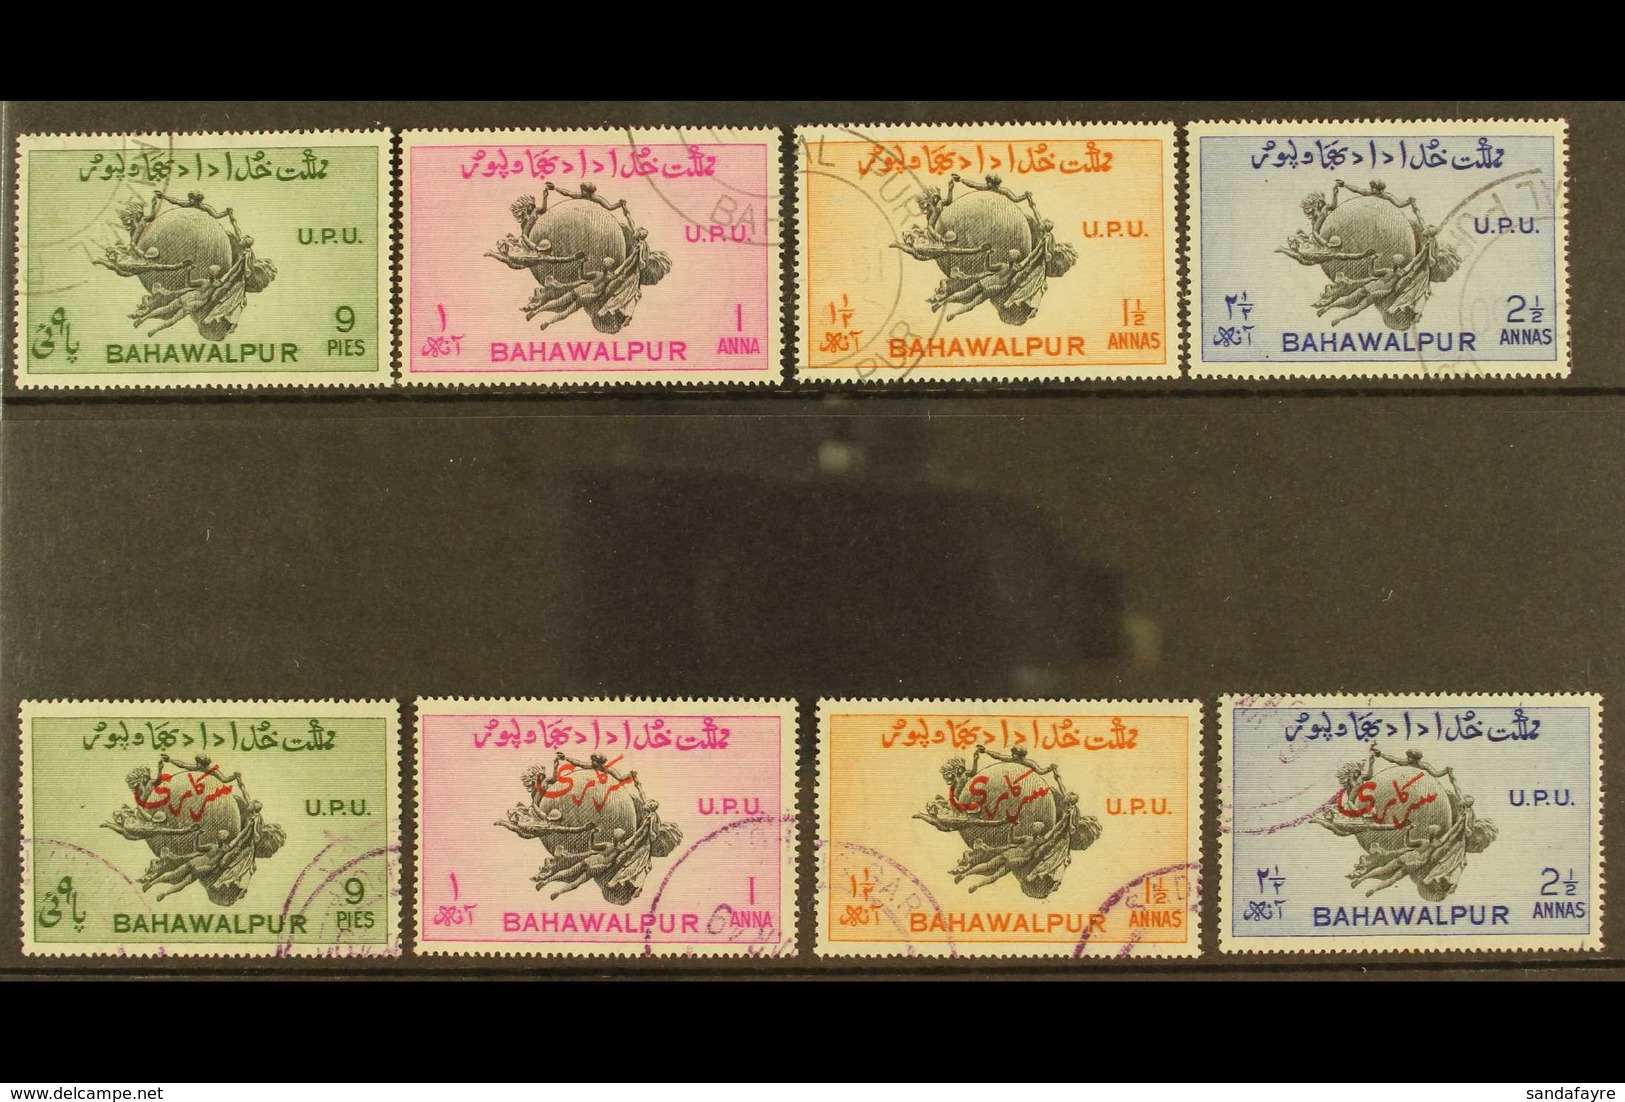 1949 UPU  Perf 17½ X17 Postal & Official Sets, SG 43a/46a & SG O28b/31b, Very Fine Used (8 Stamps) For More Images, Plea - Bahawalpur